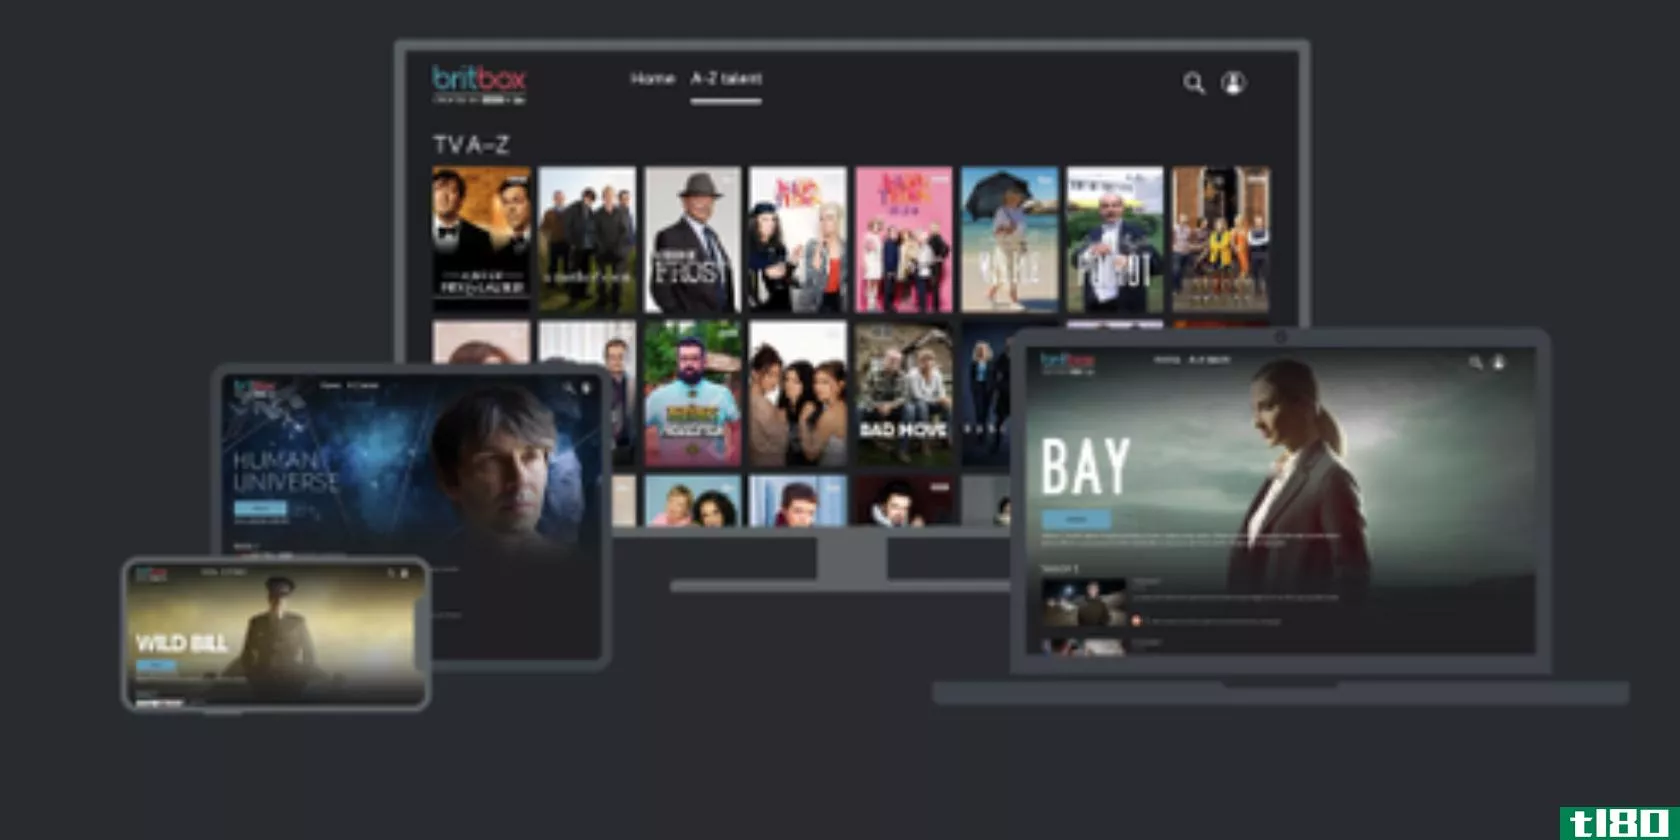 britbox-streaming-service-devices